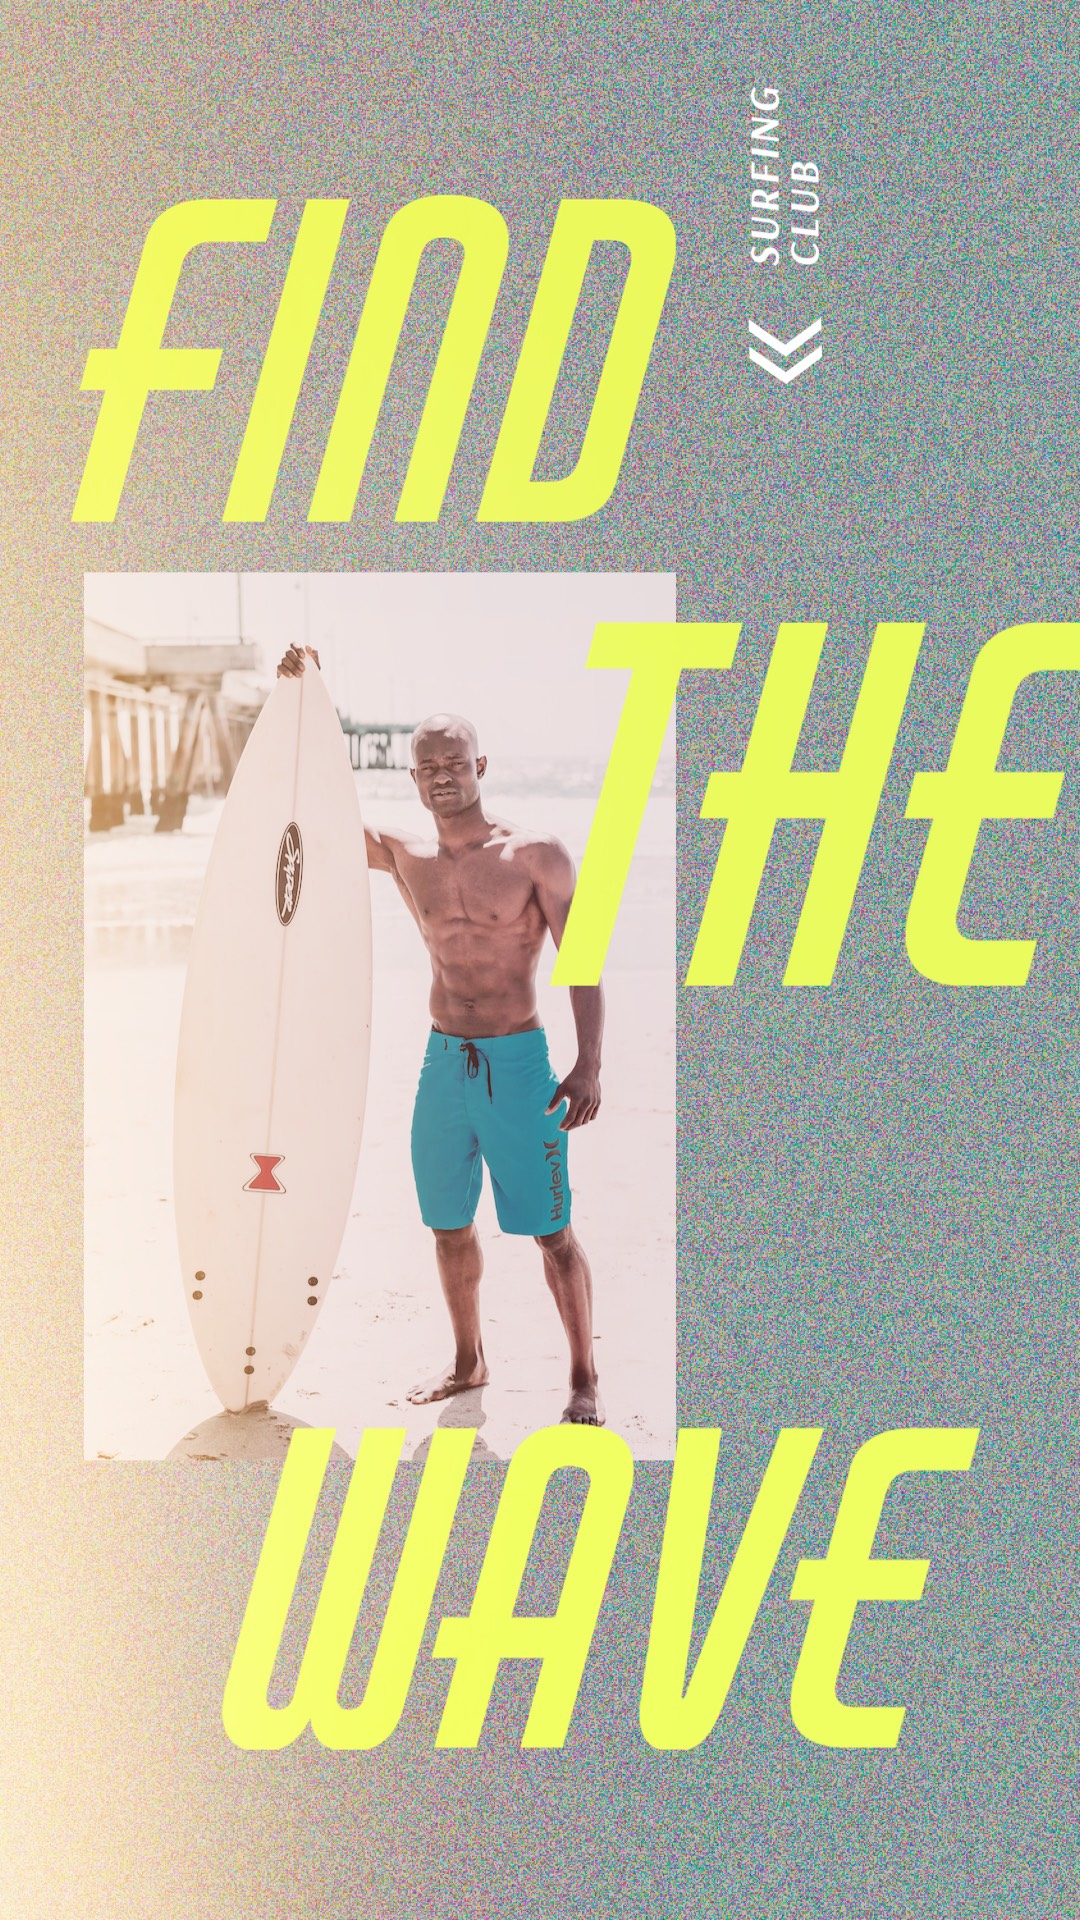 Find the wave man on the beach holding a surfboard summer story template